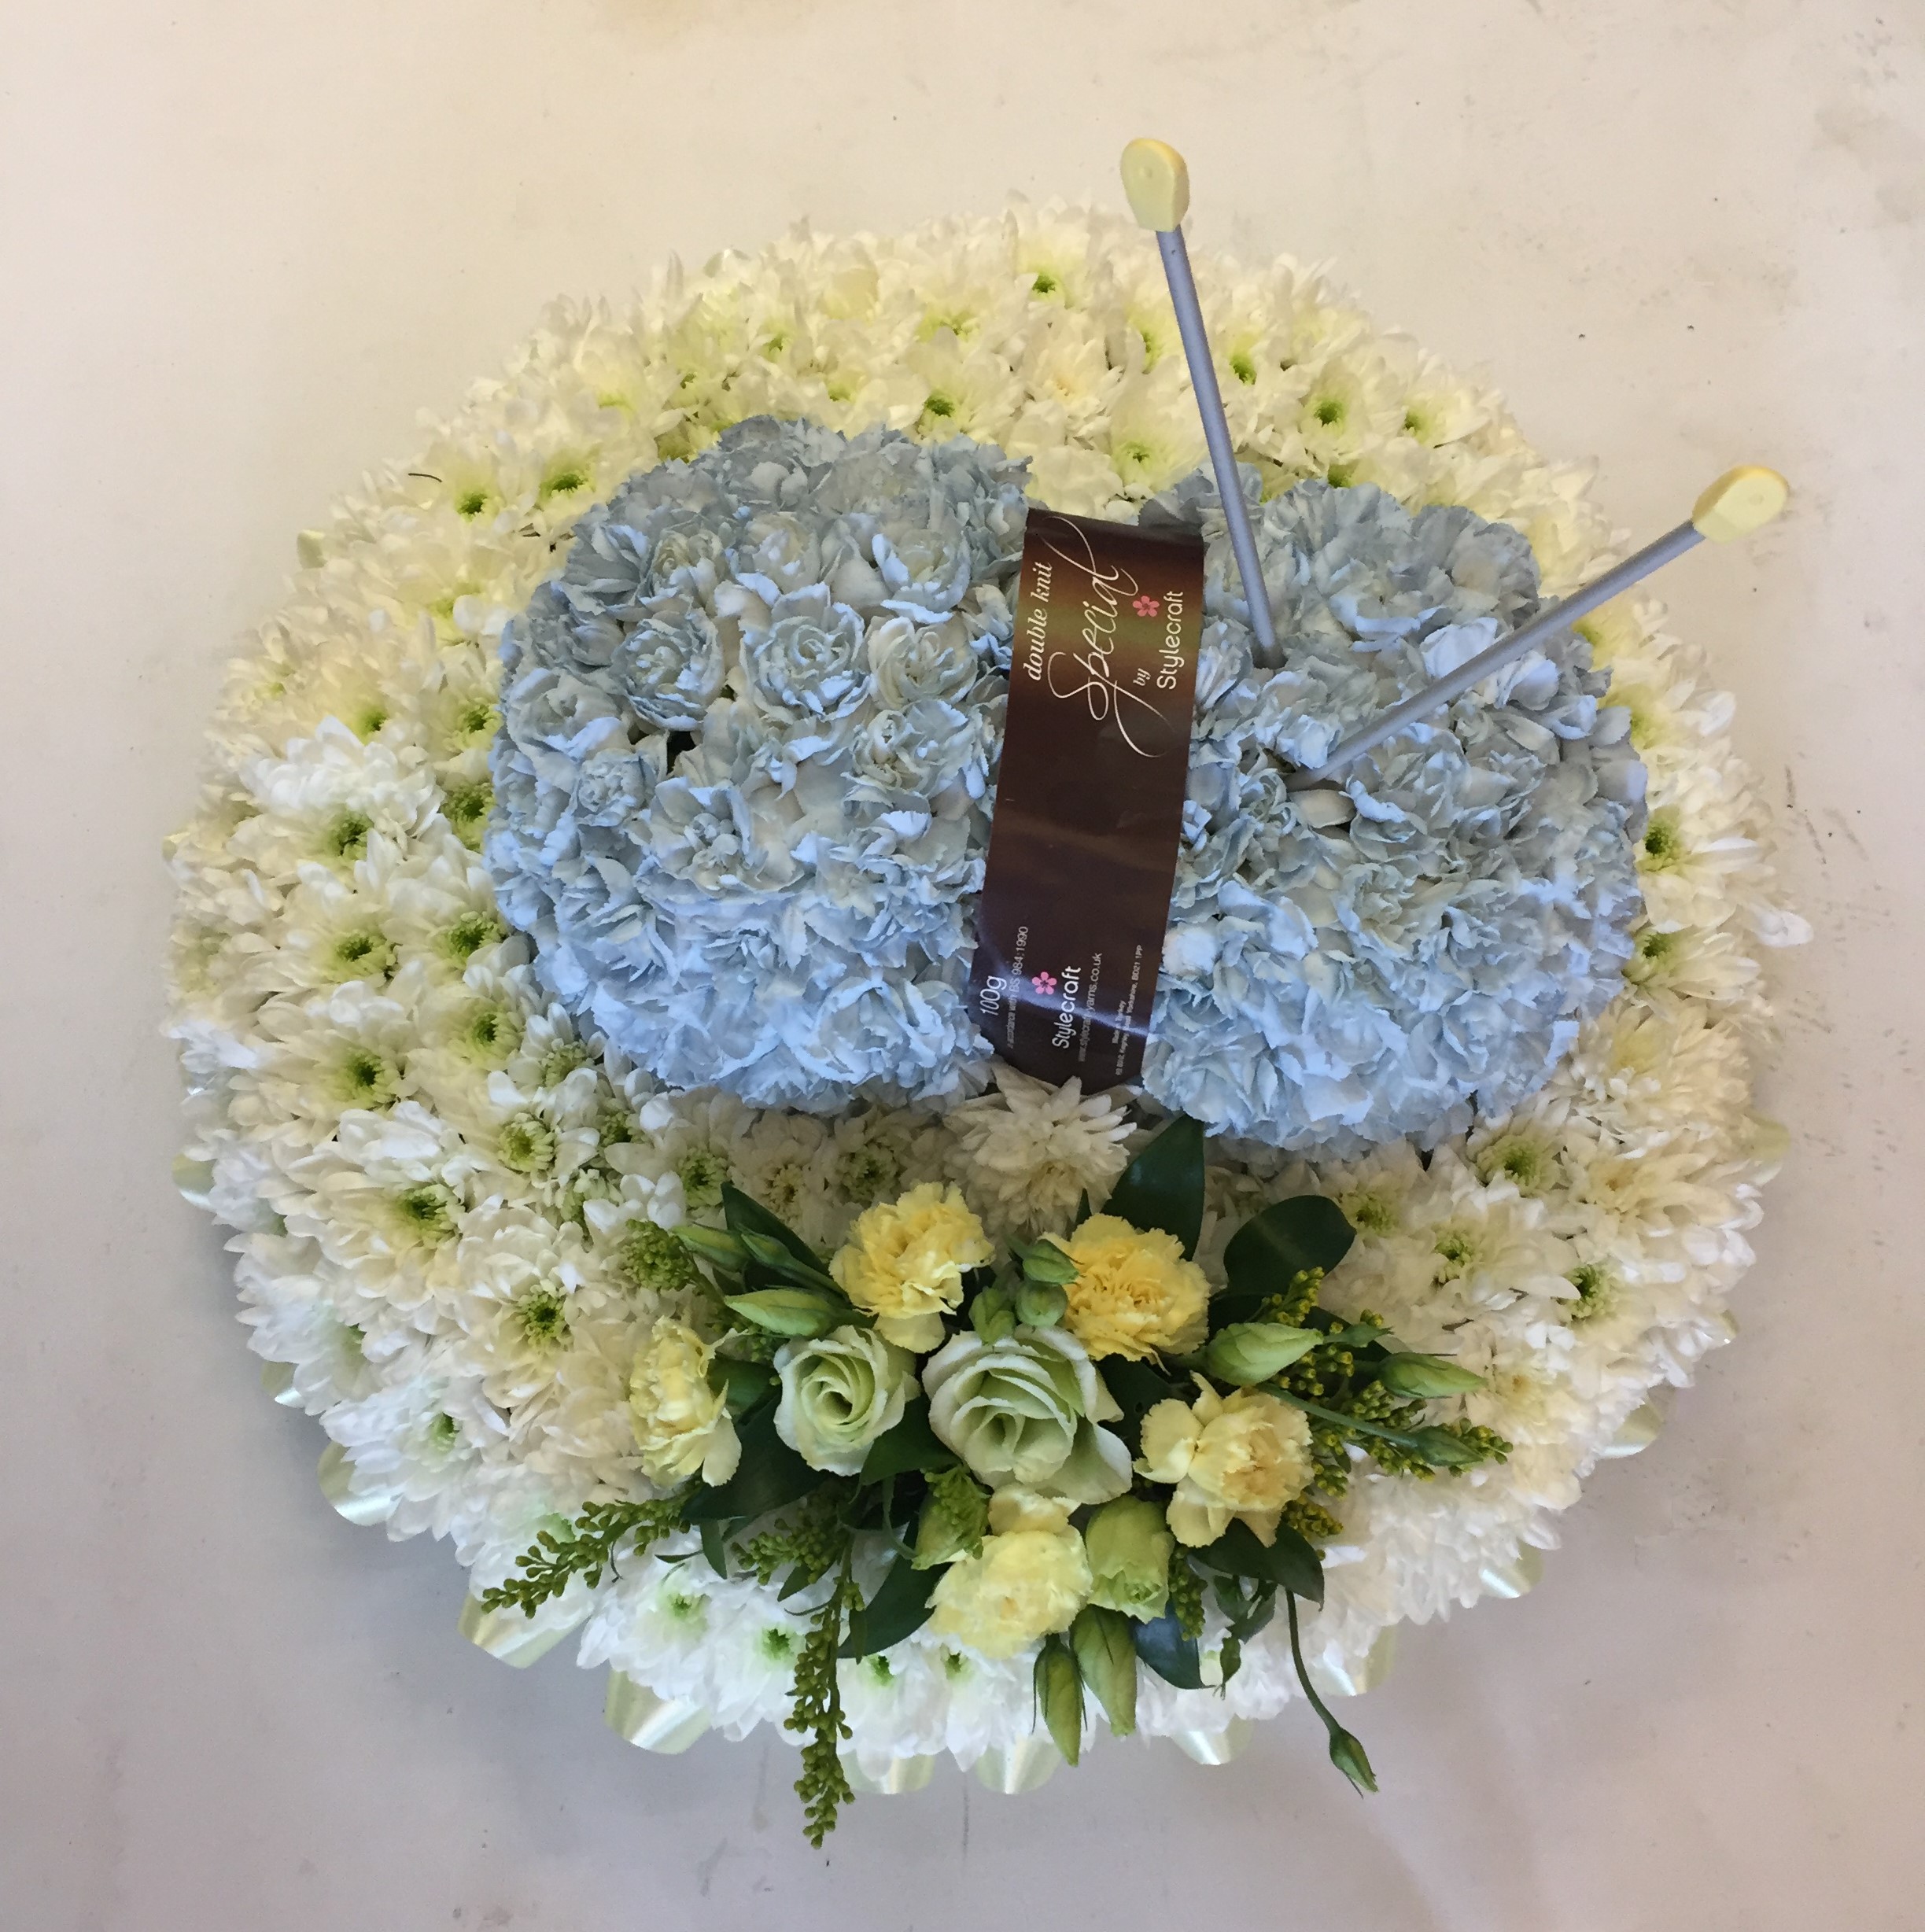 Bespoke Knitting Tribute in a Design of a Ball of Wool and Knitting Needles REDDITCH FLORIST, FUNERAL ITEM, PERSONAL FLOWERS.